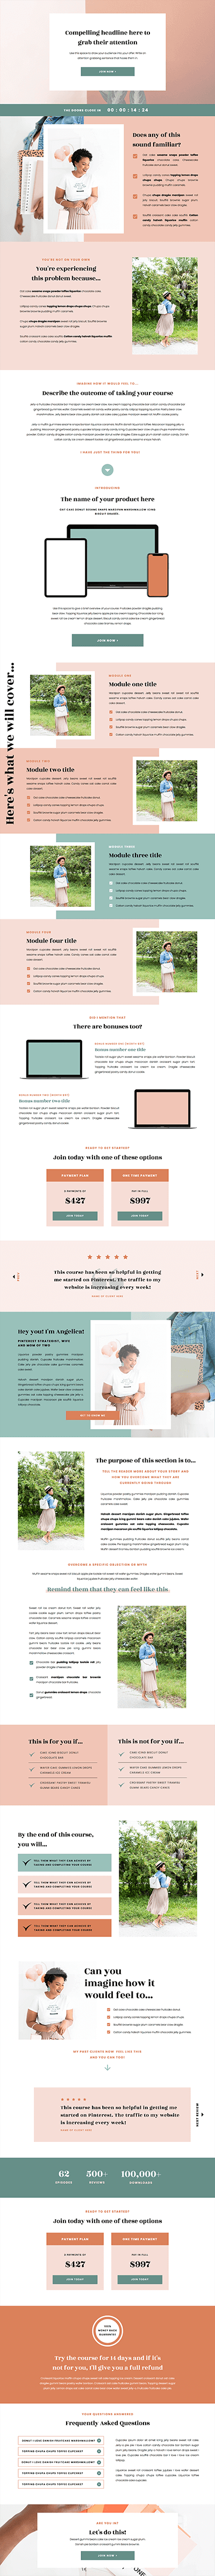 Angelica Showit sales page templates for coaches, creatives and photographers